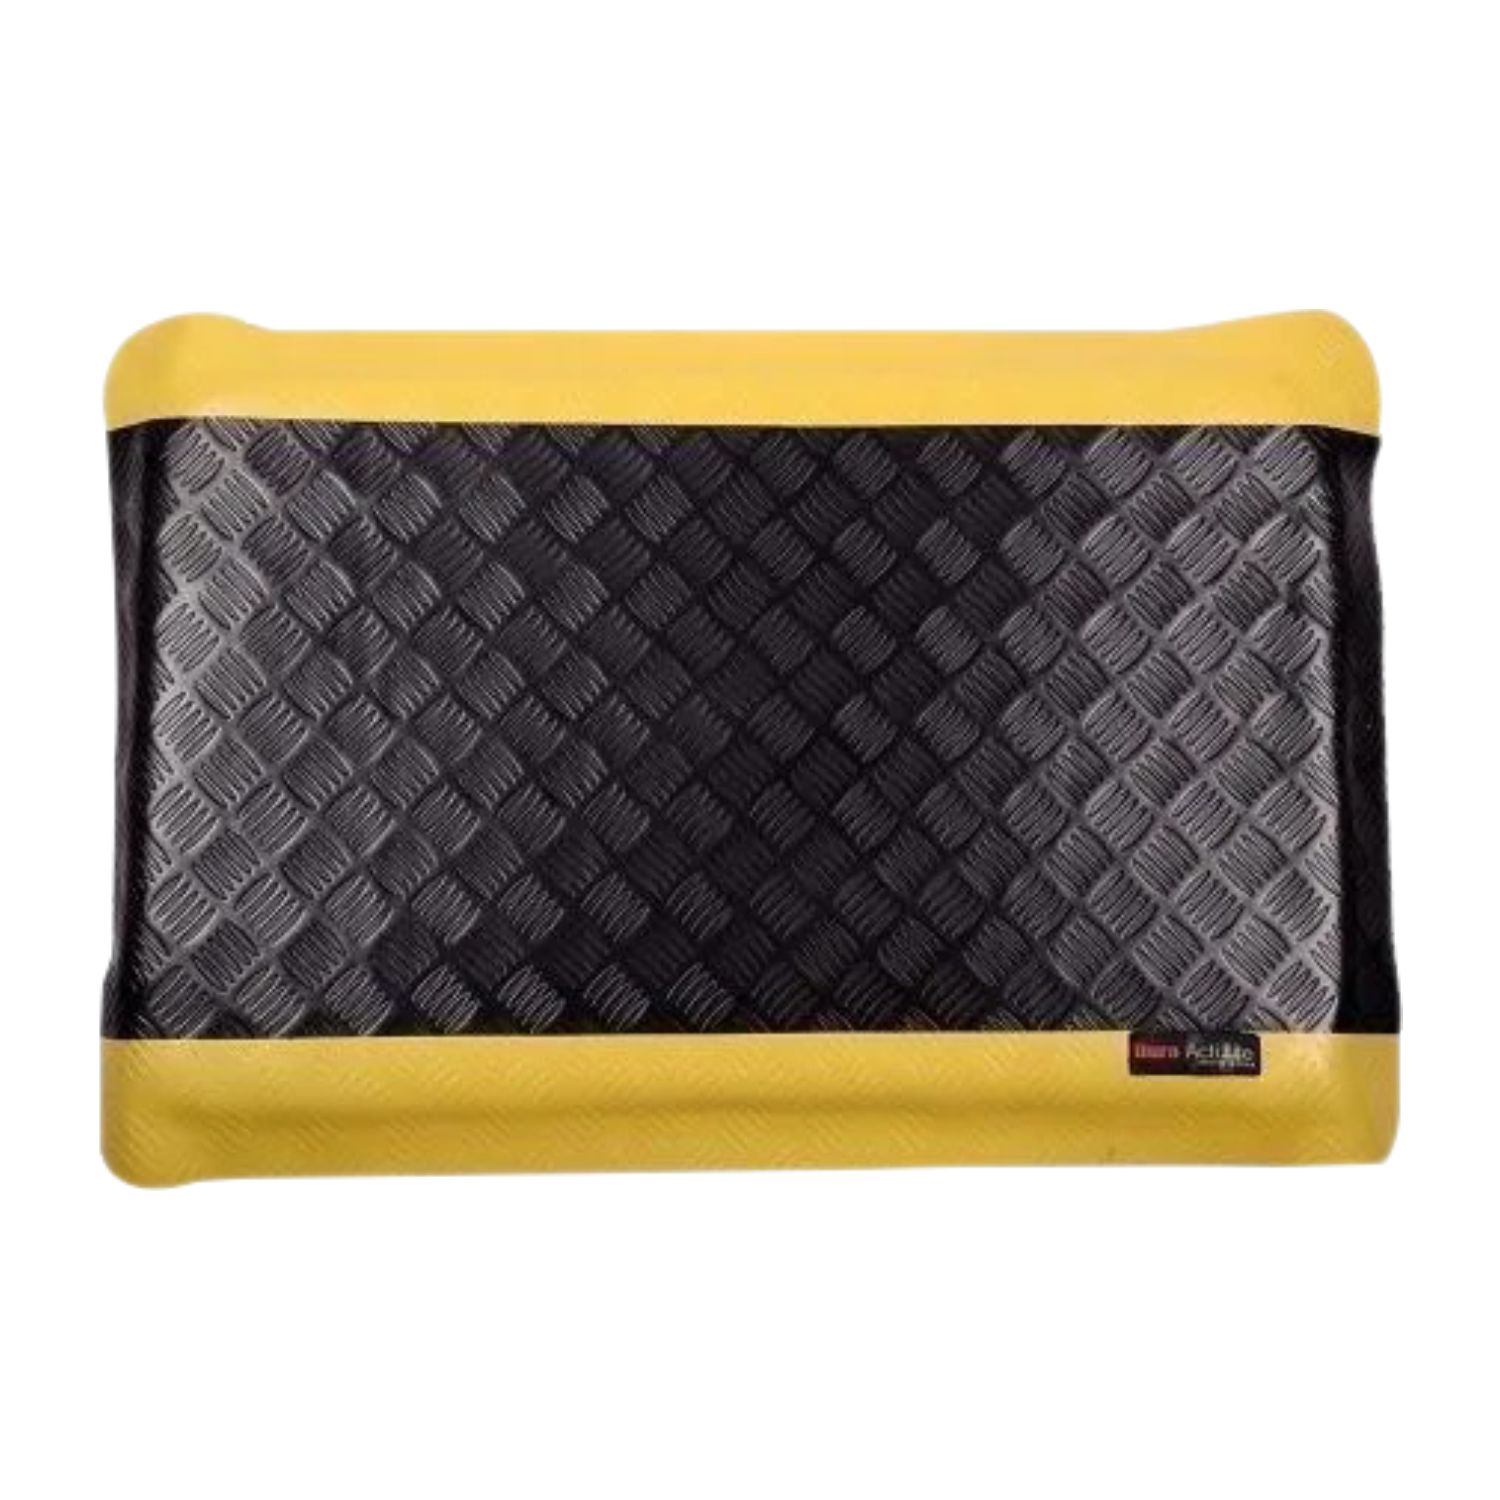 Duro Active PVC Anti Fatigue Mat – 2 feet X 3 feet  Black and Yellow (Pack of 1)